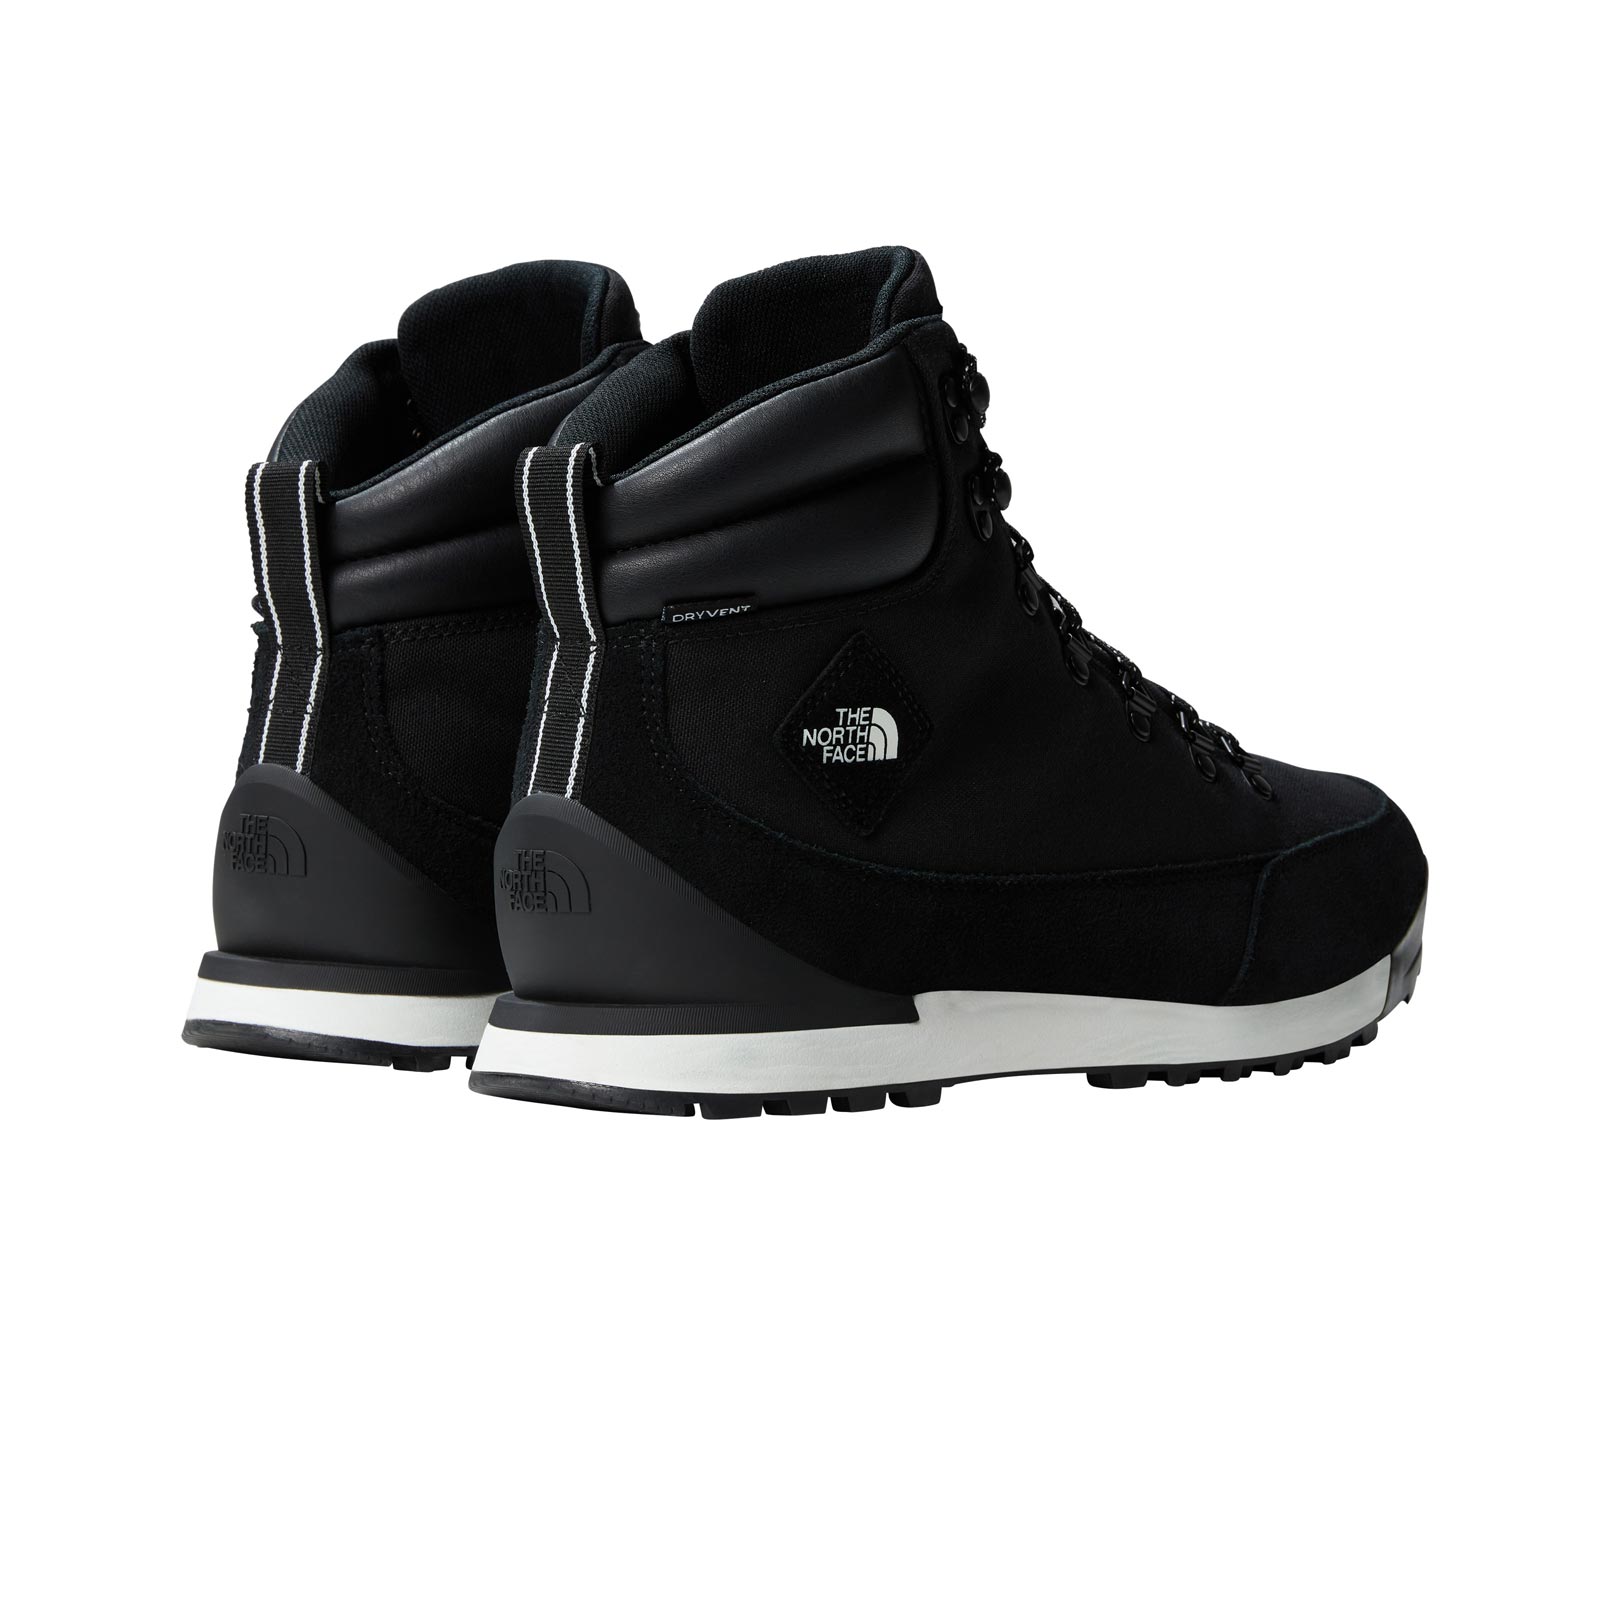 THE NORTH FACE BACK-TO-BERKELEY IV MENS BOOTS